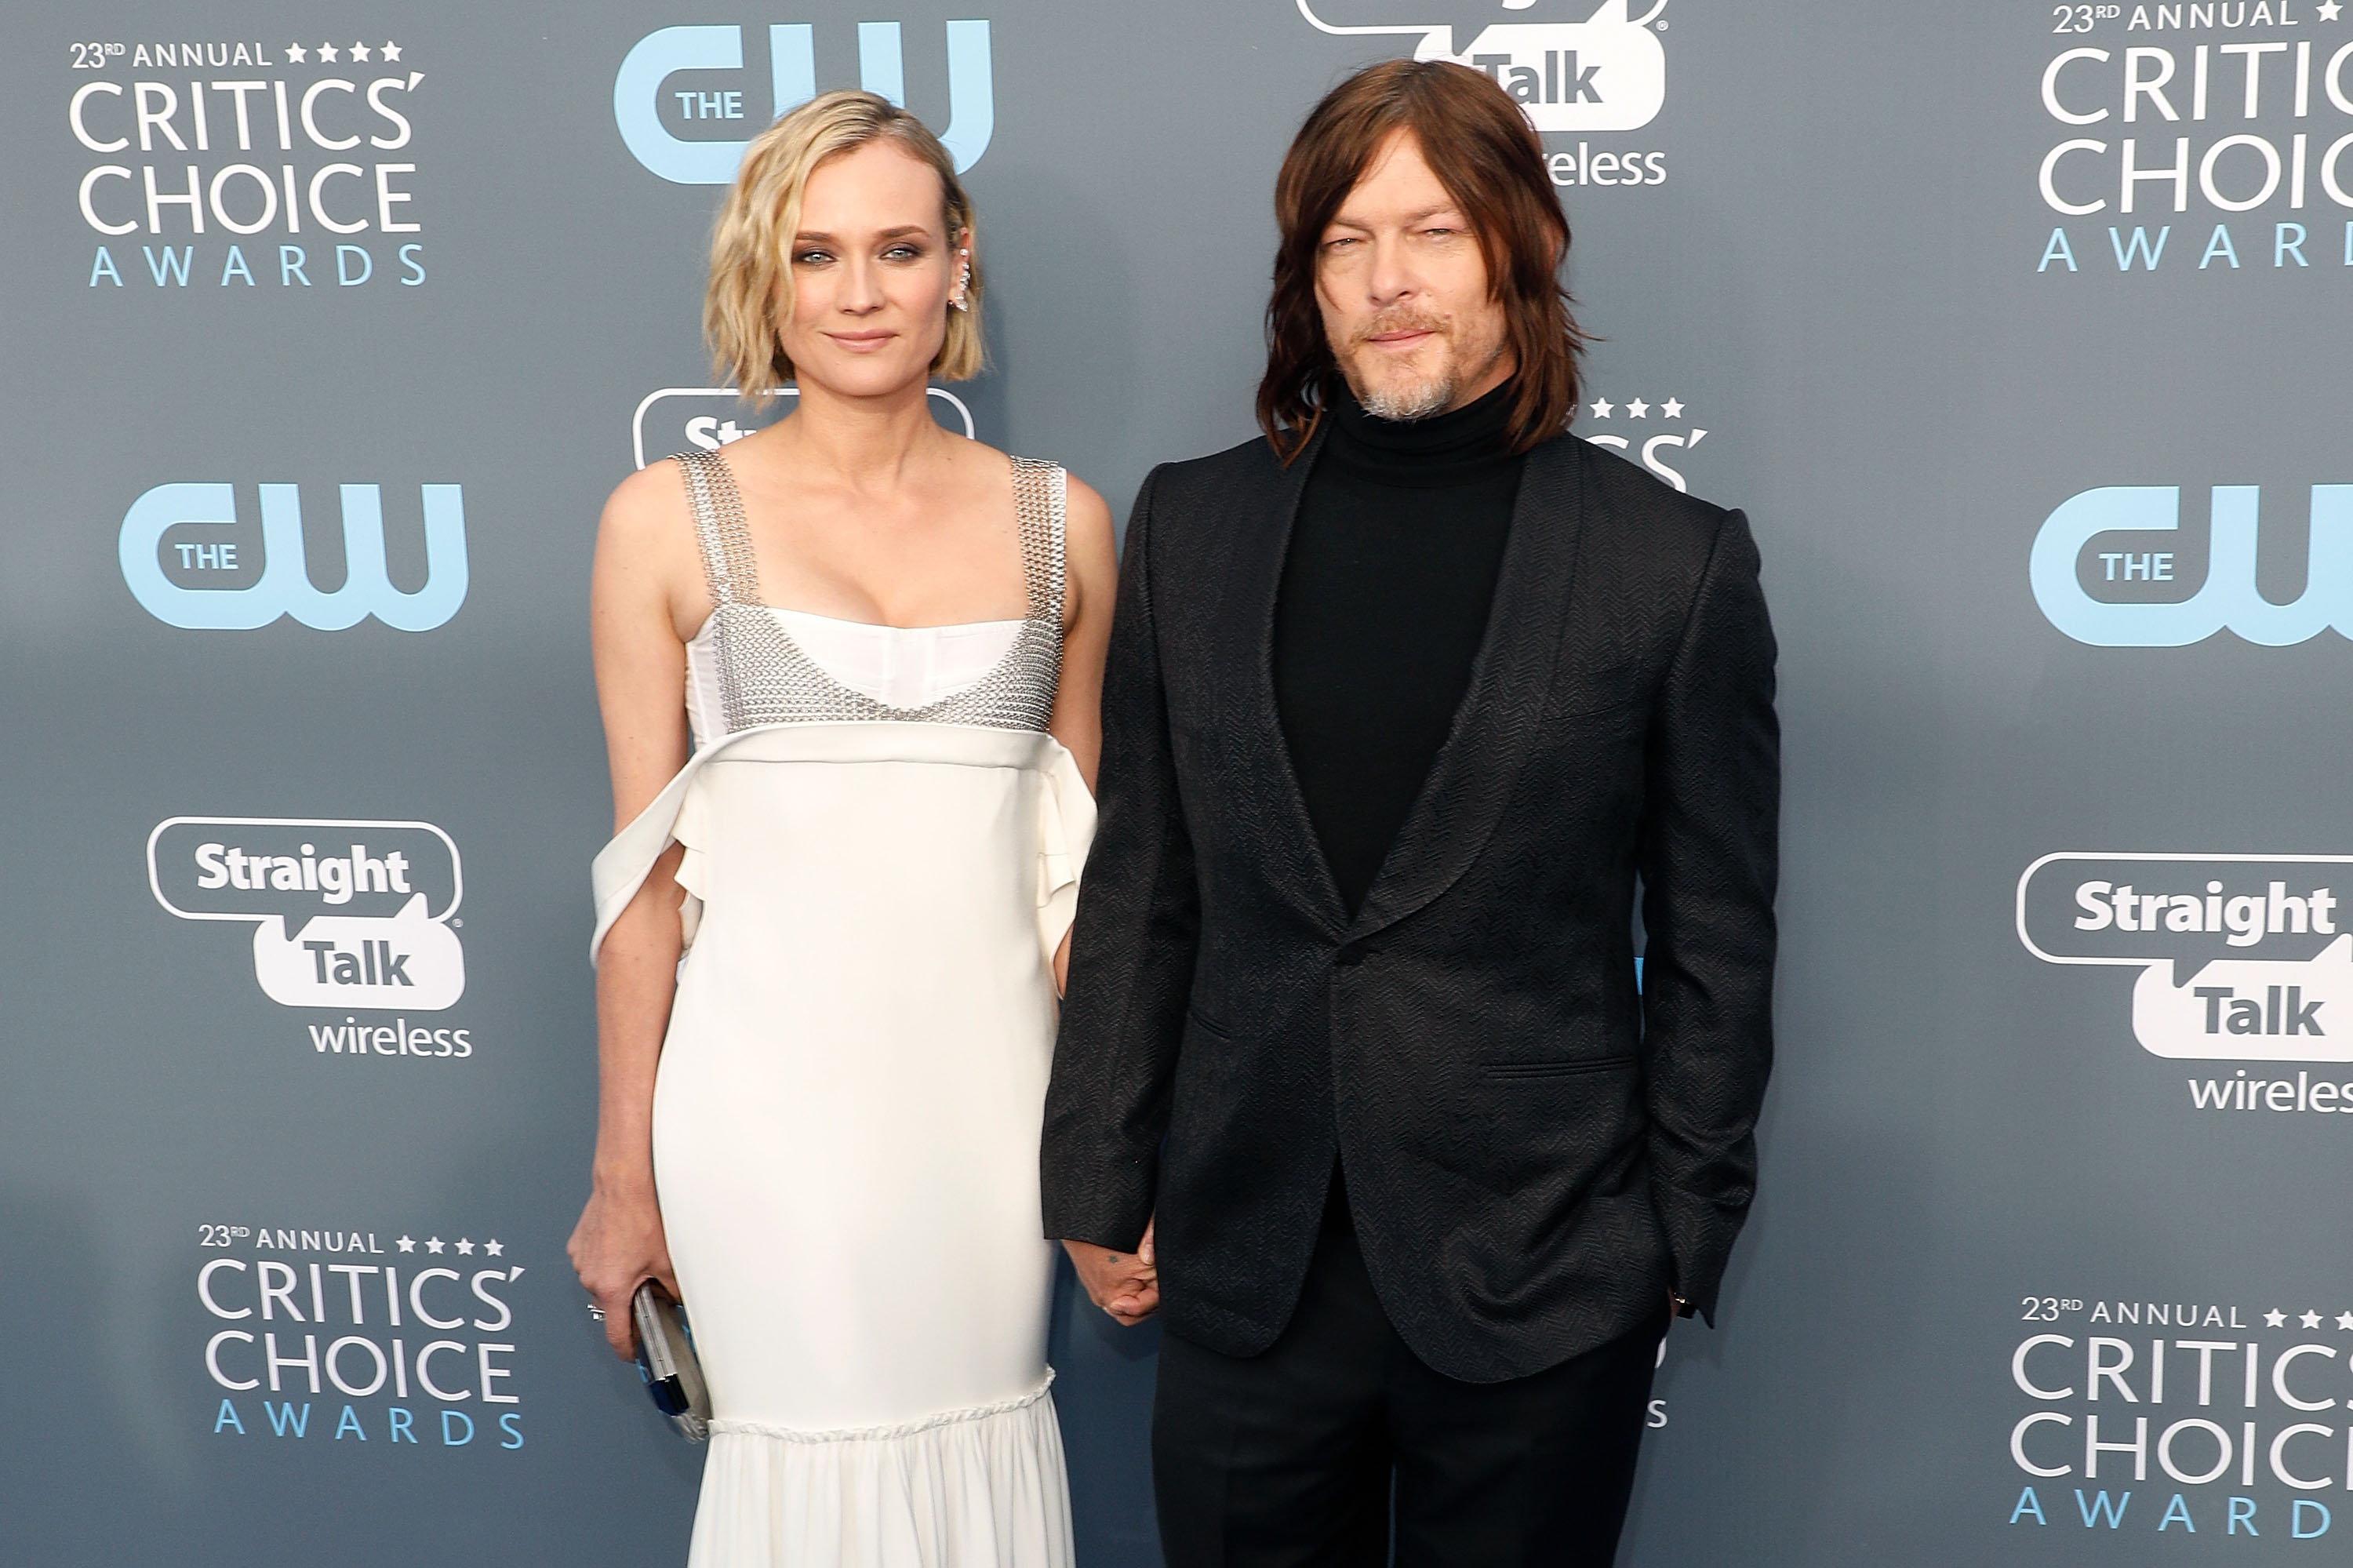 Norman Reedus and Diane Kruger attend the 23rd annual Critics' Choice Awards at the Barker Hangar on January 11, 2018, in Santa Monica, California. | Photo: Getty Images